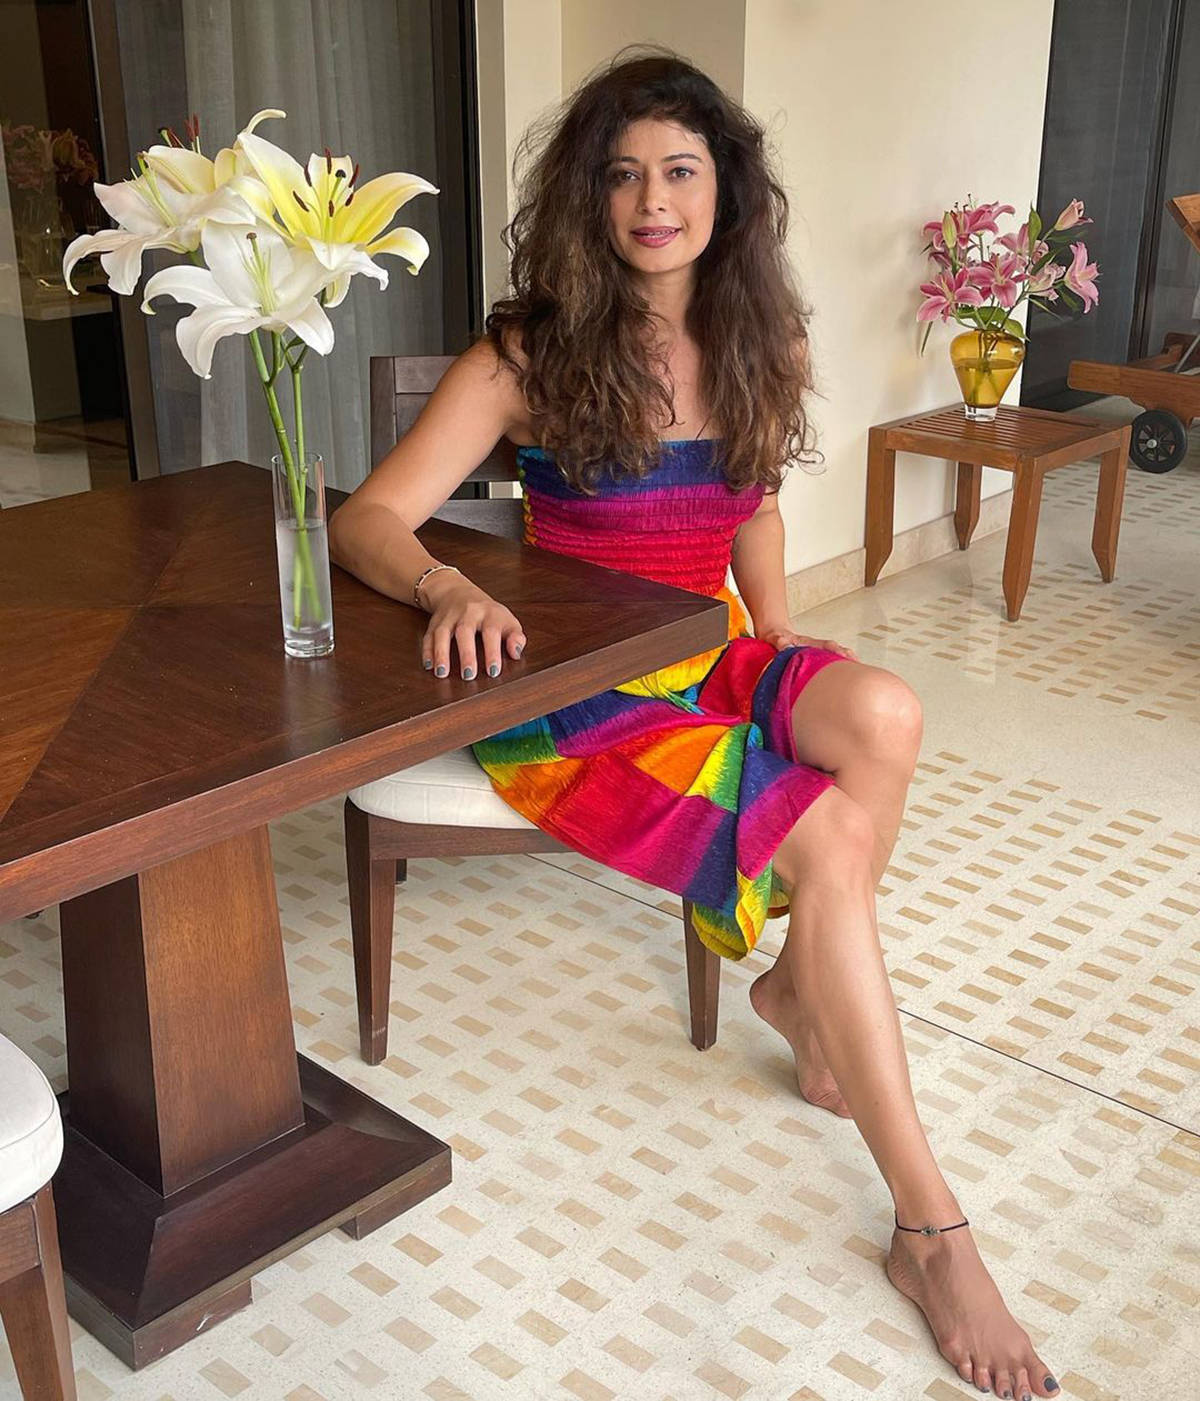 Pooja Batra is making new waves on the net with her glamorous photos